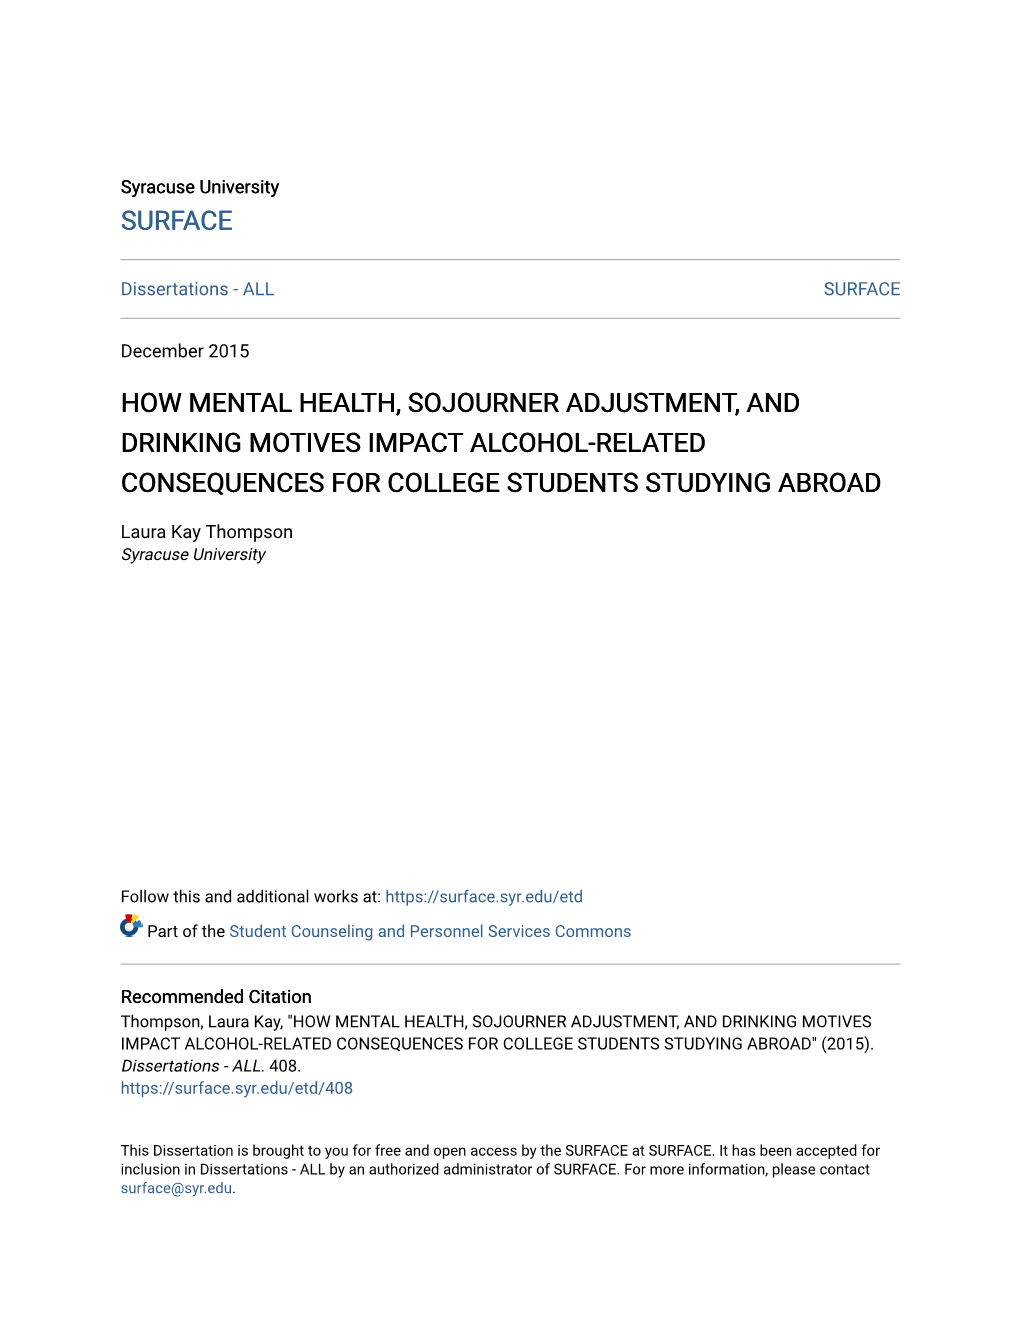 How Mental Health, Sojourner Adjustment, and Drinking Motives Impact Alcohol-Related Consequences for College Students Studying Abroad